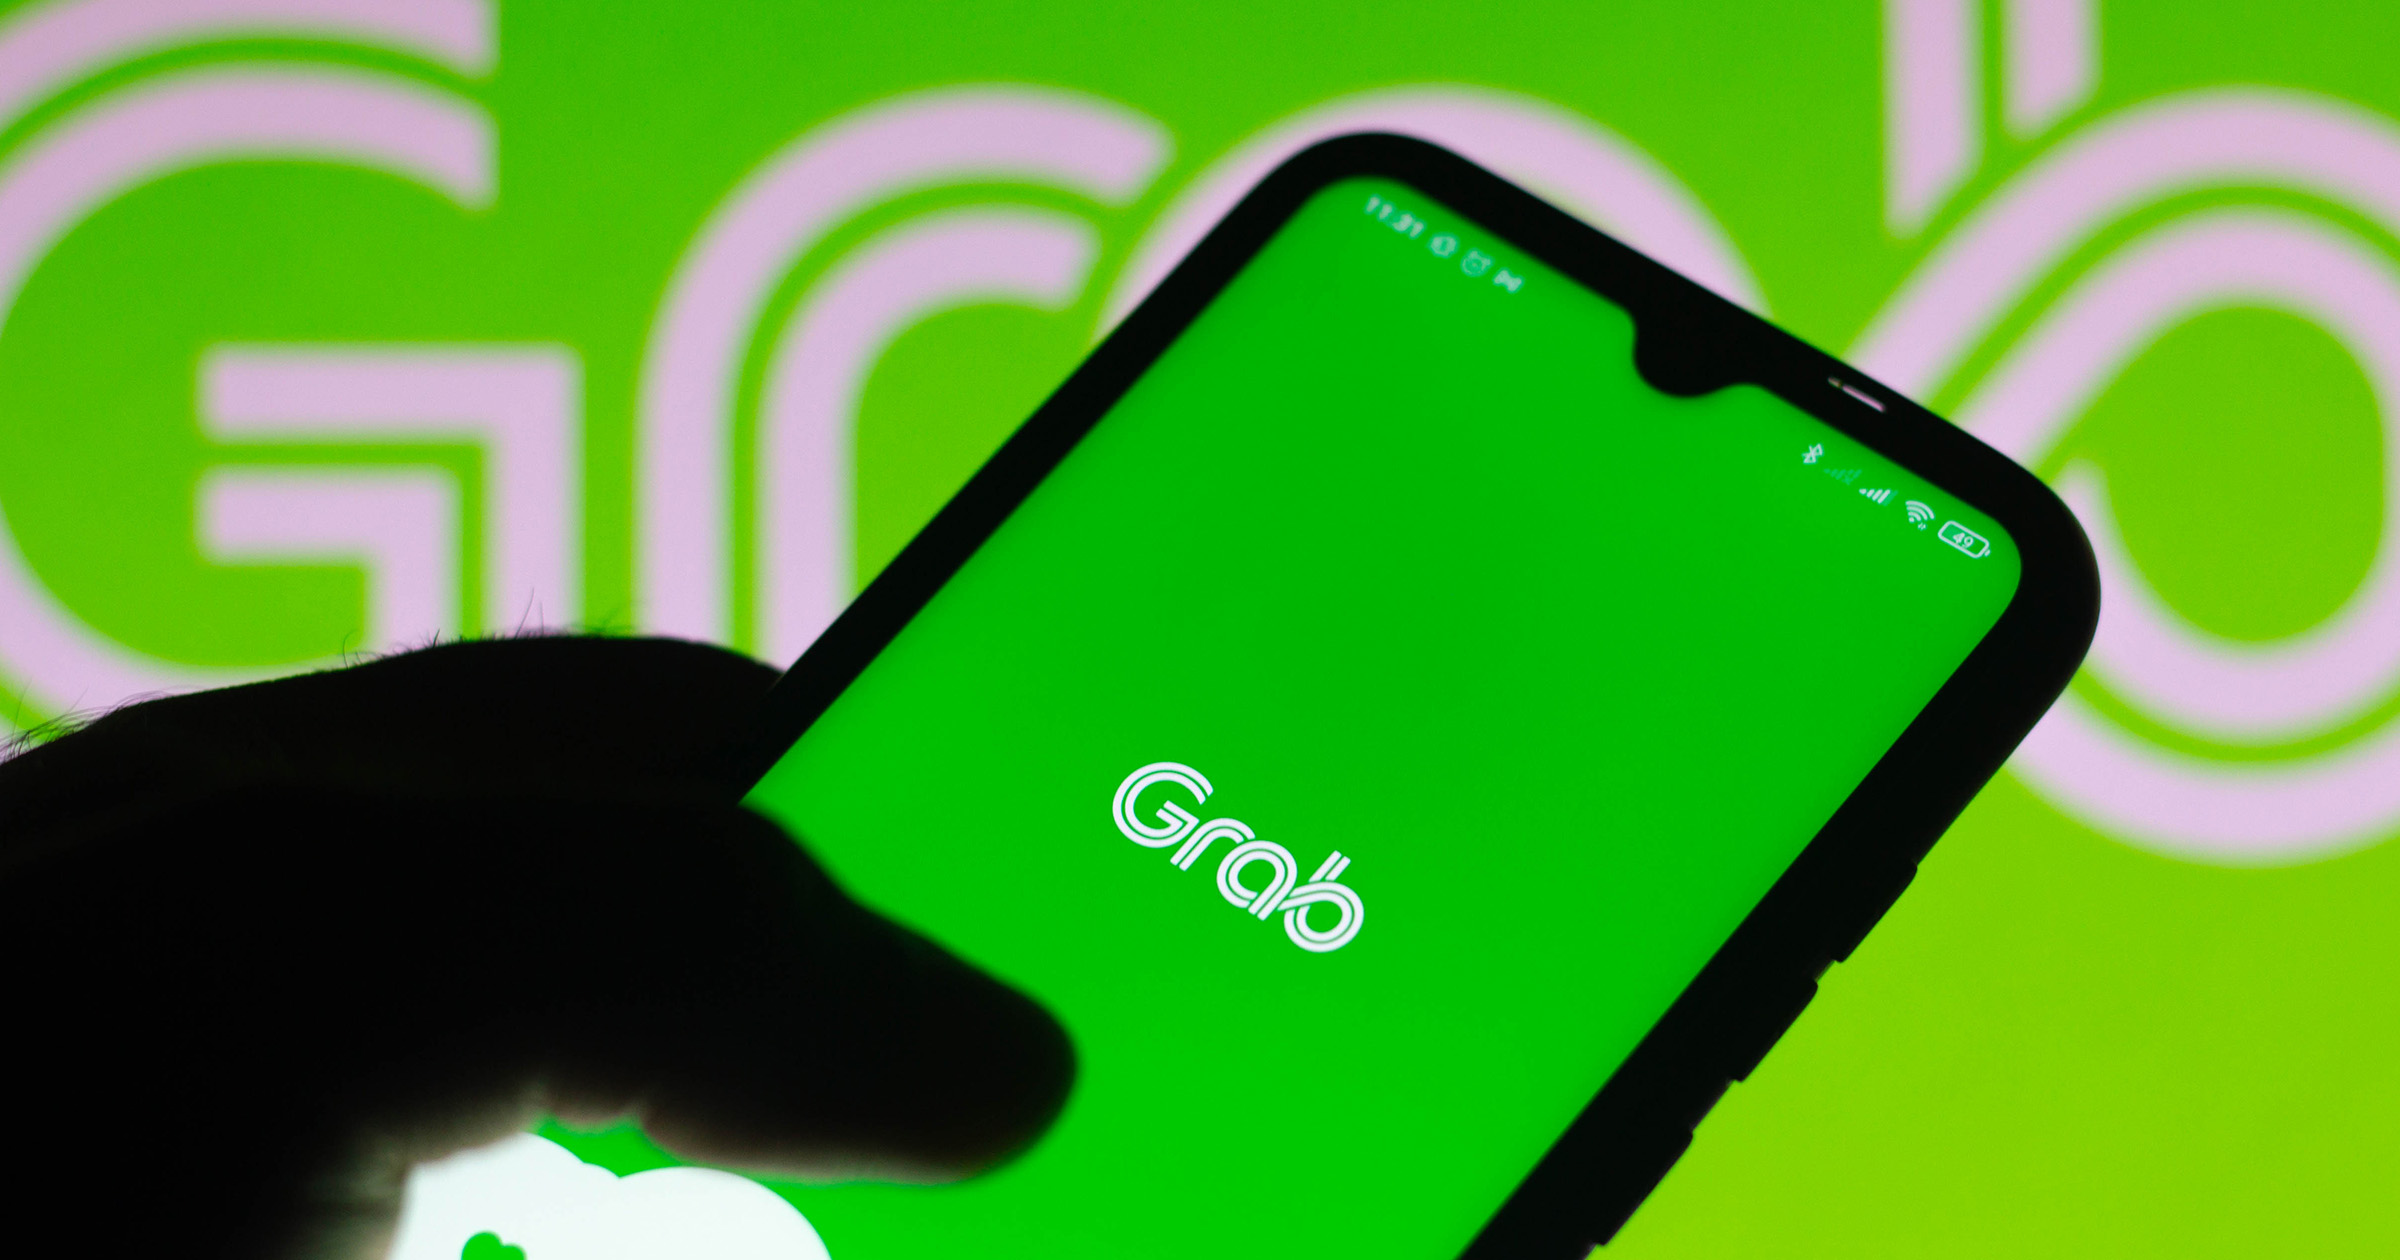 Grab’s stock rallies as the company beats estimates: 77% jump in revenue, 74% drop in losses